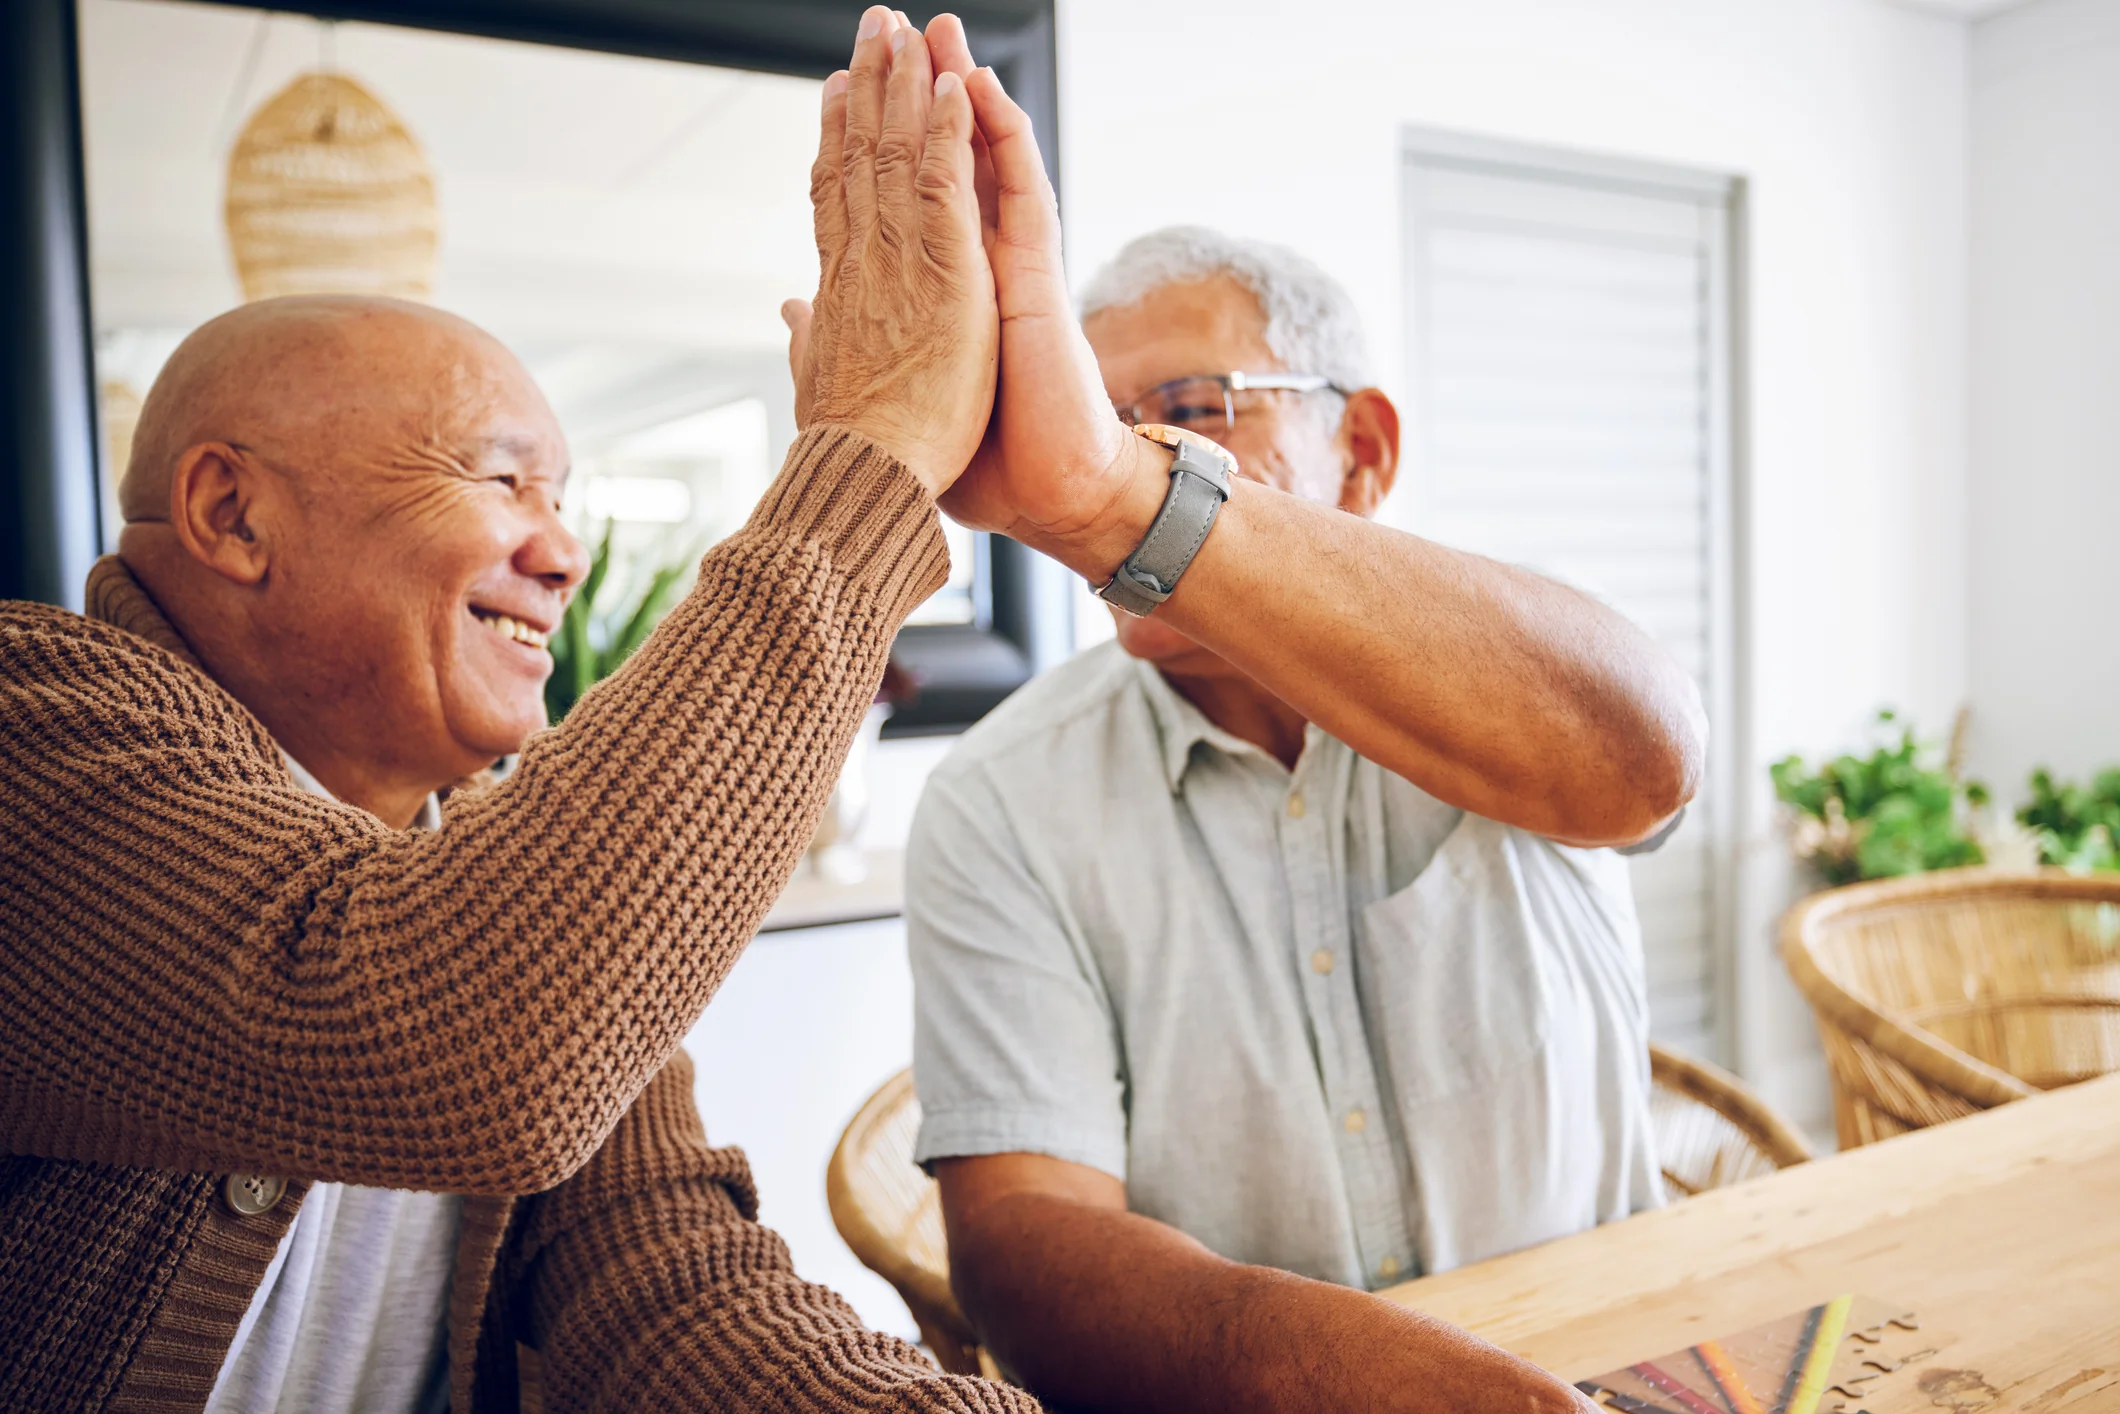 What Are the Benefits of Social Interaction for Seniors?